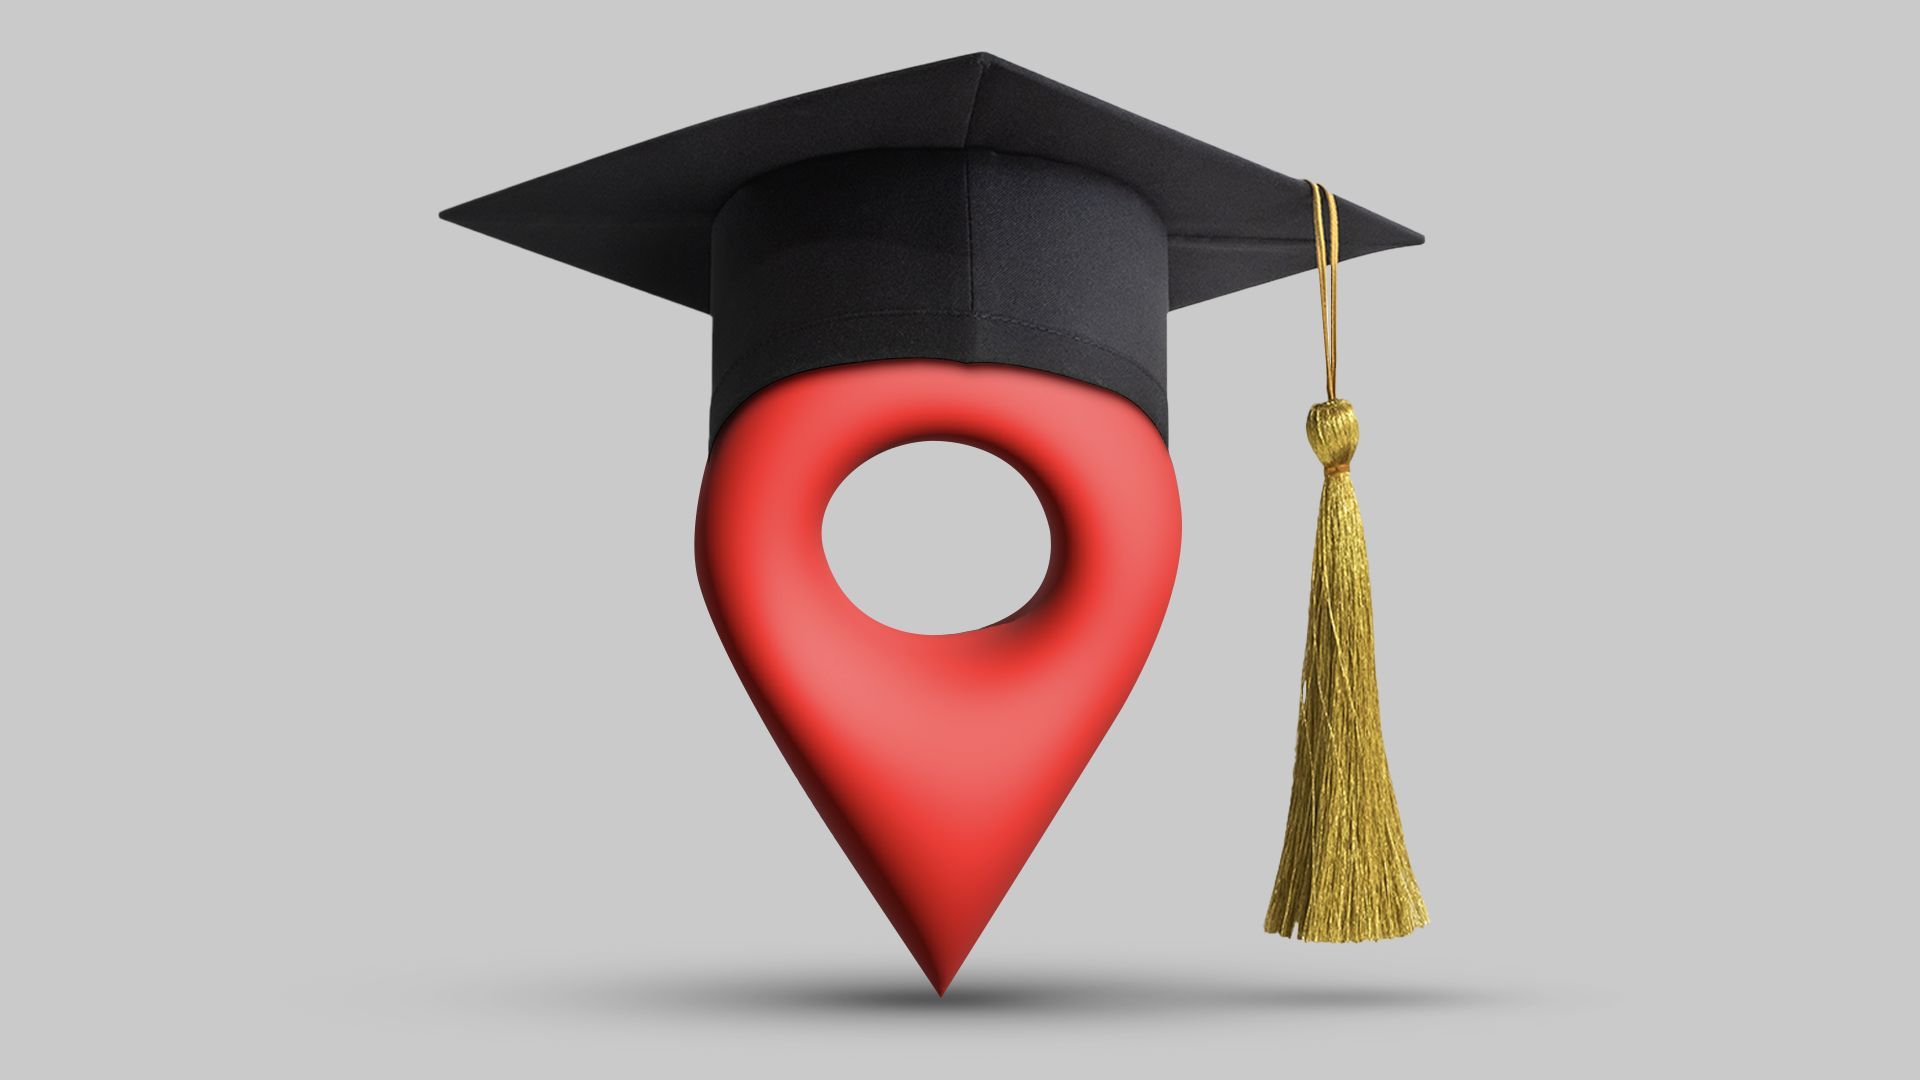 Illustration of a location pin wearing a mortar board